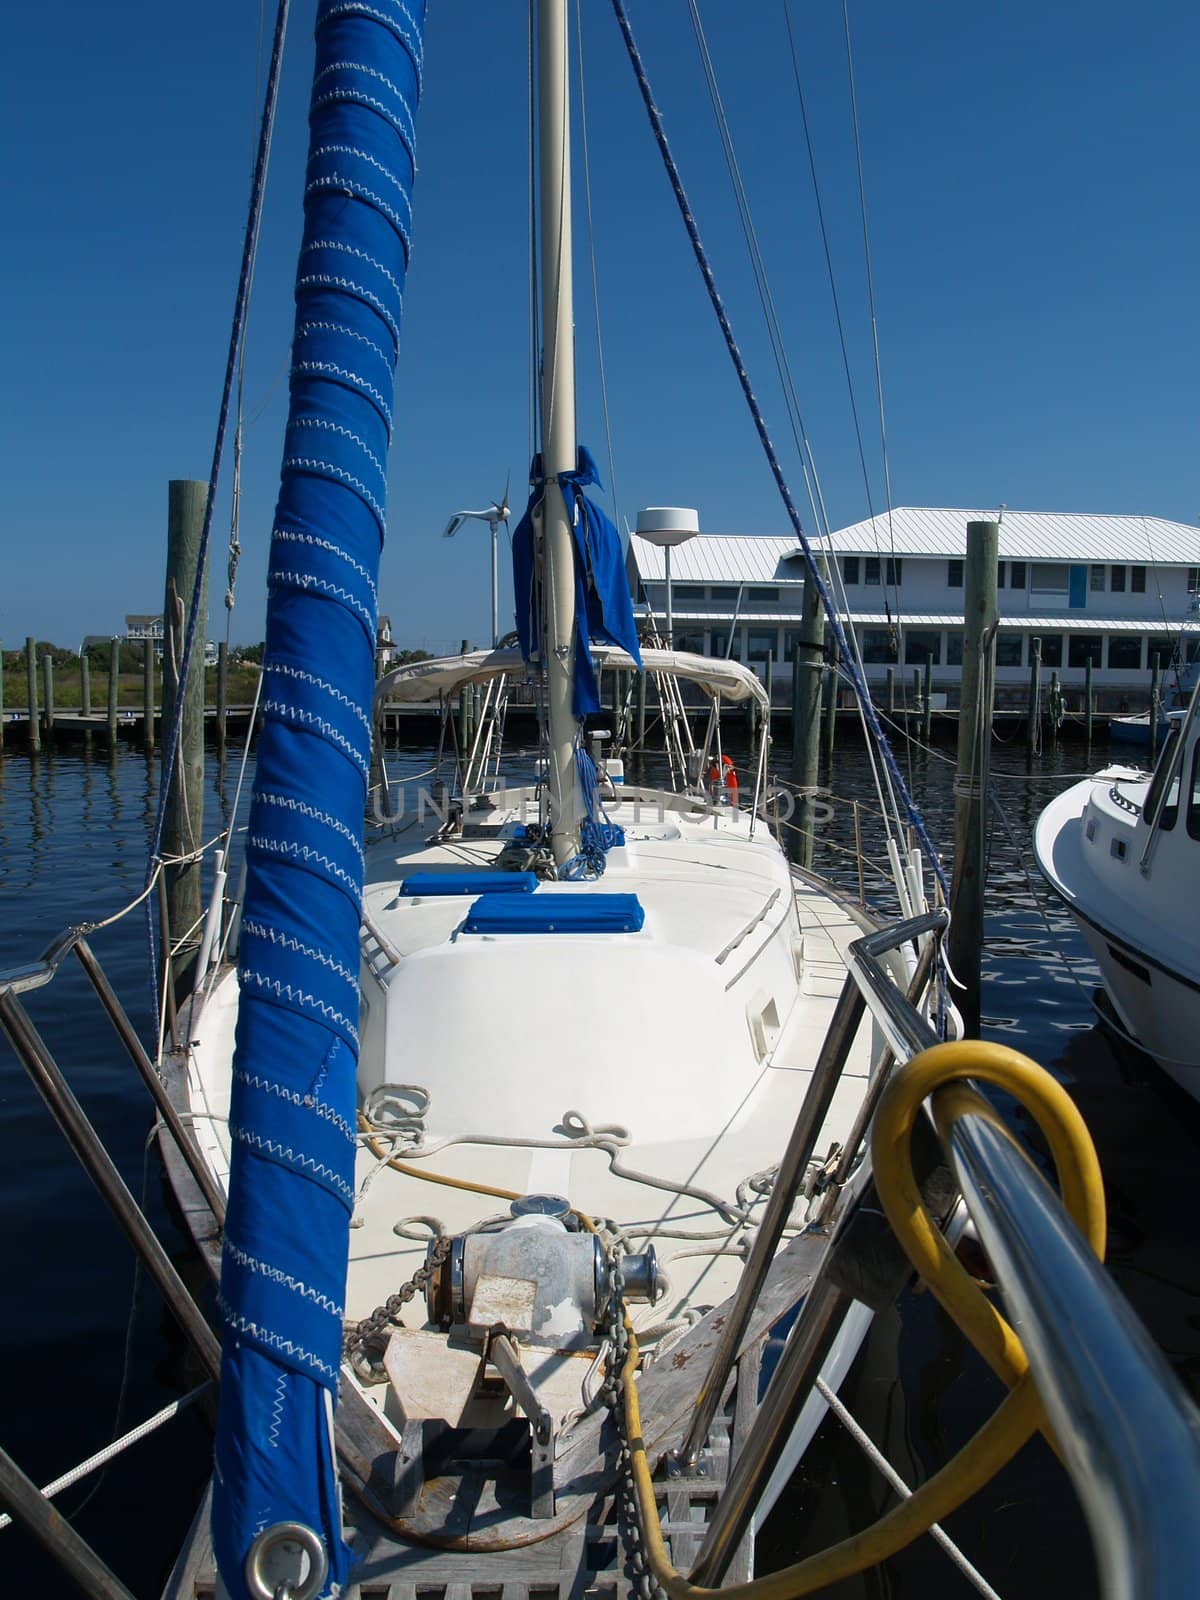 Abstract view from the bow of a sailboat at the dock with the rigging, railings and marina pilings visible. A bright blue sail wrapped around the mainstay is in the forground.